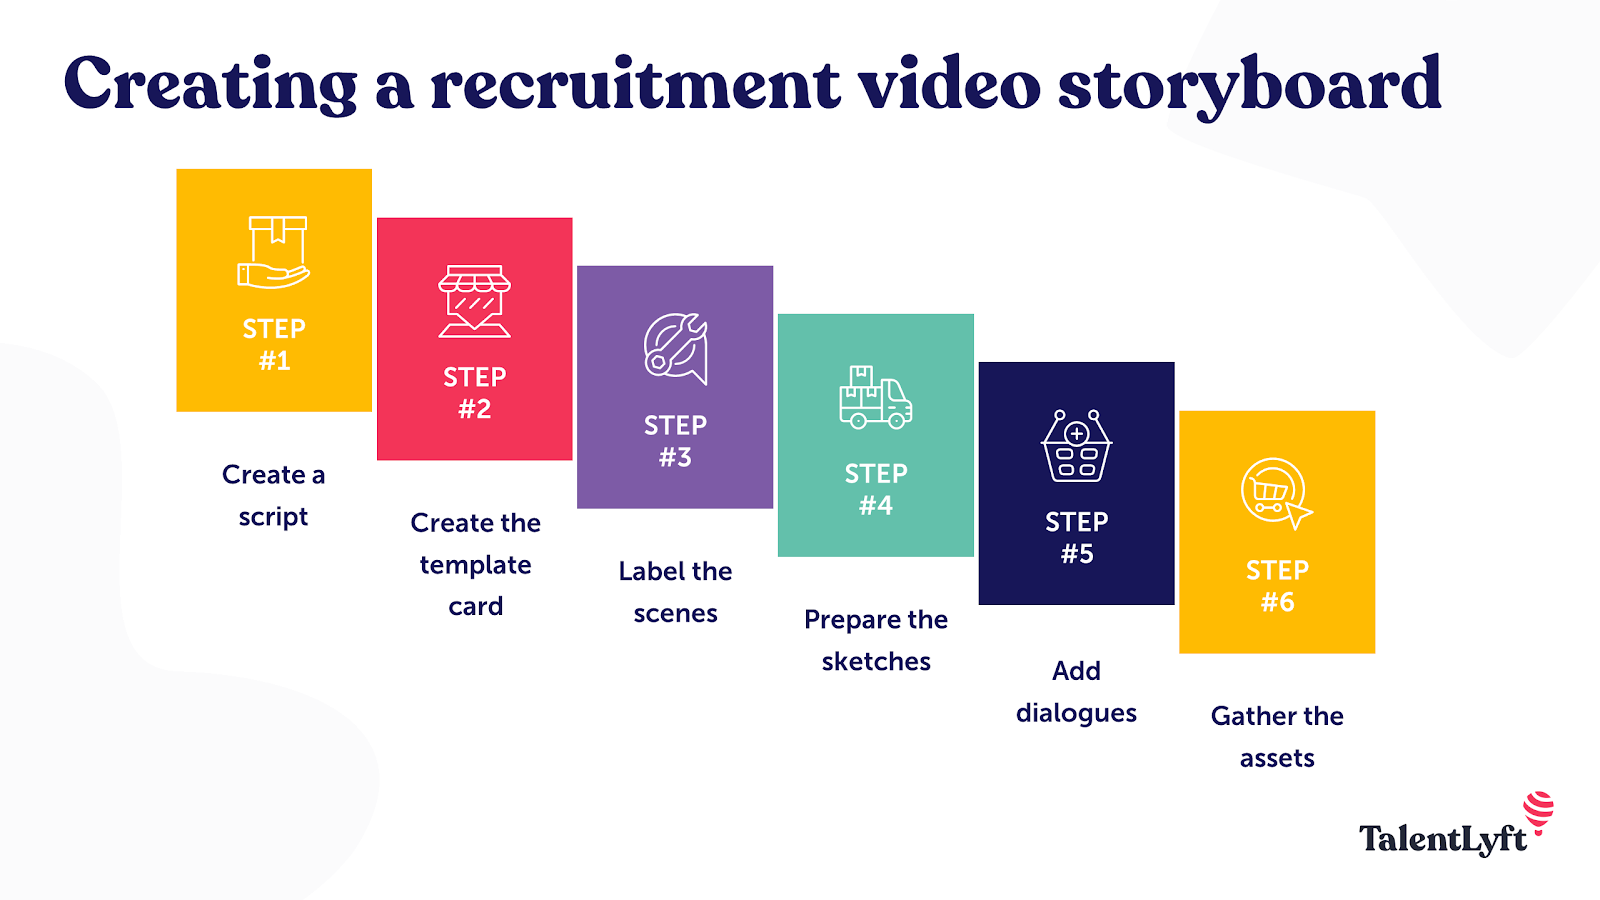 How to create a recruitment video storyboard